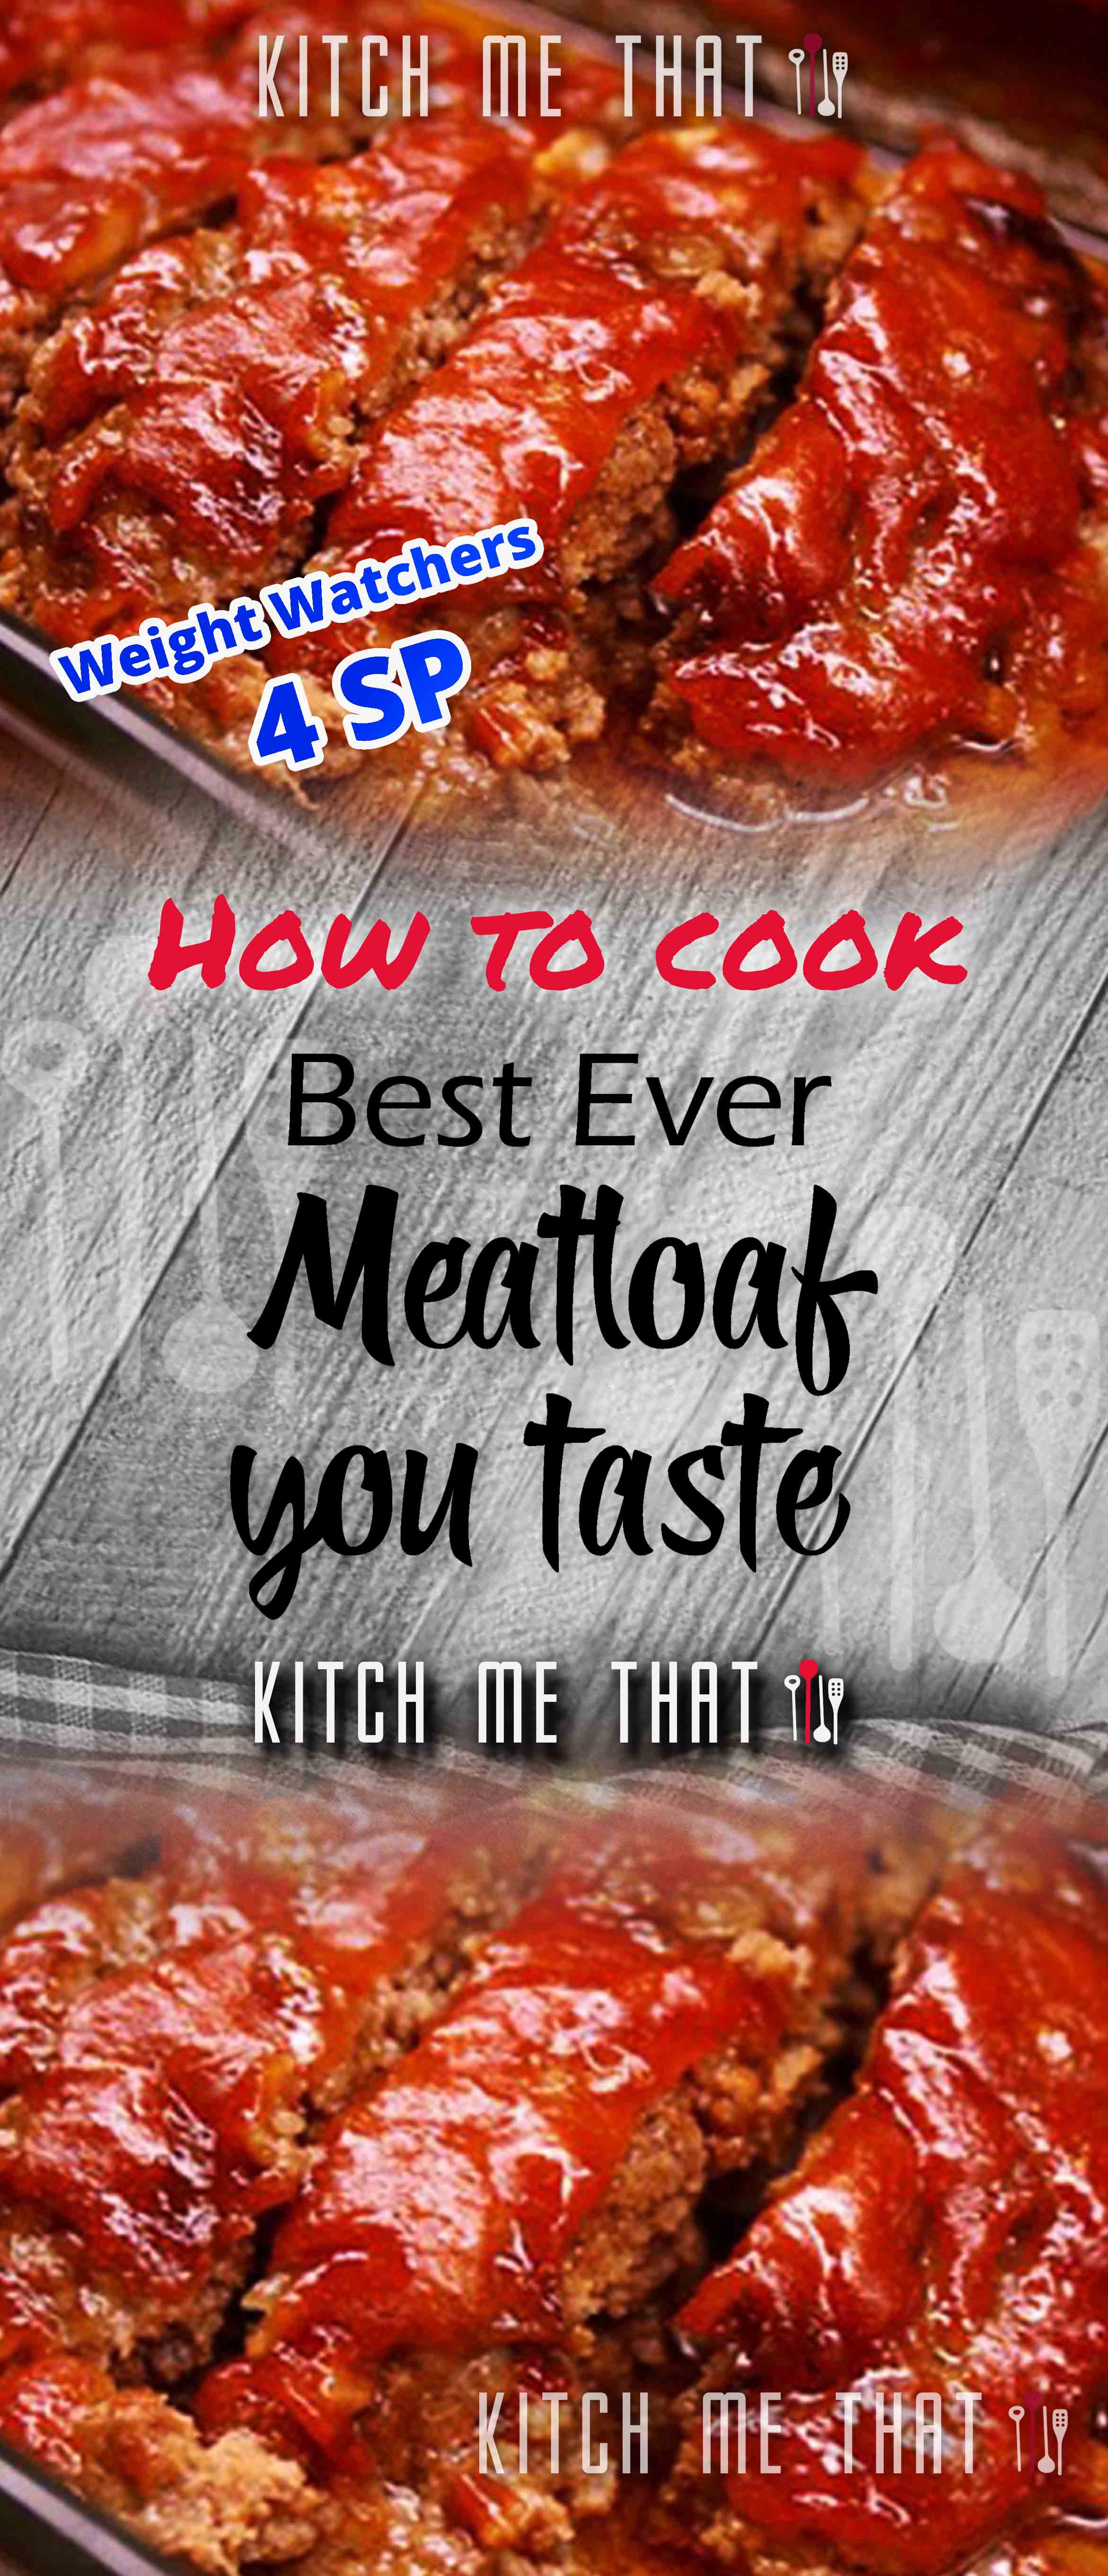 Exclusive Best Ever Meatloaf NEW 2021